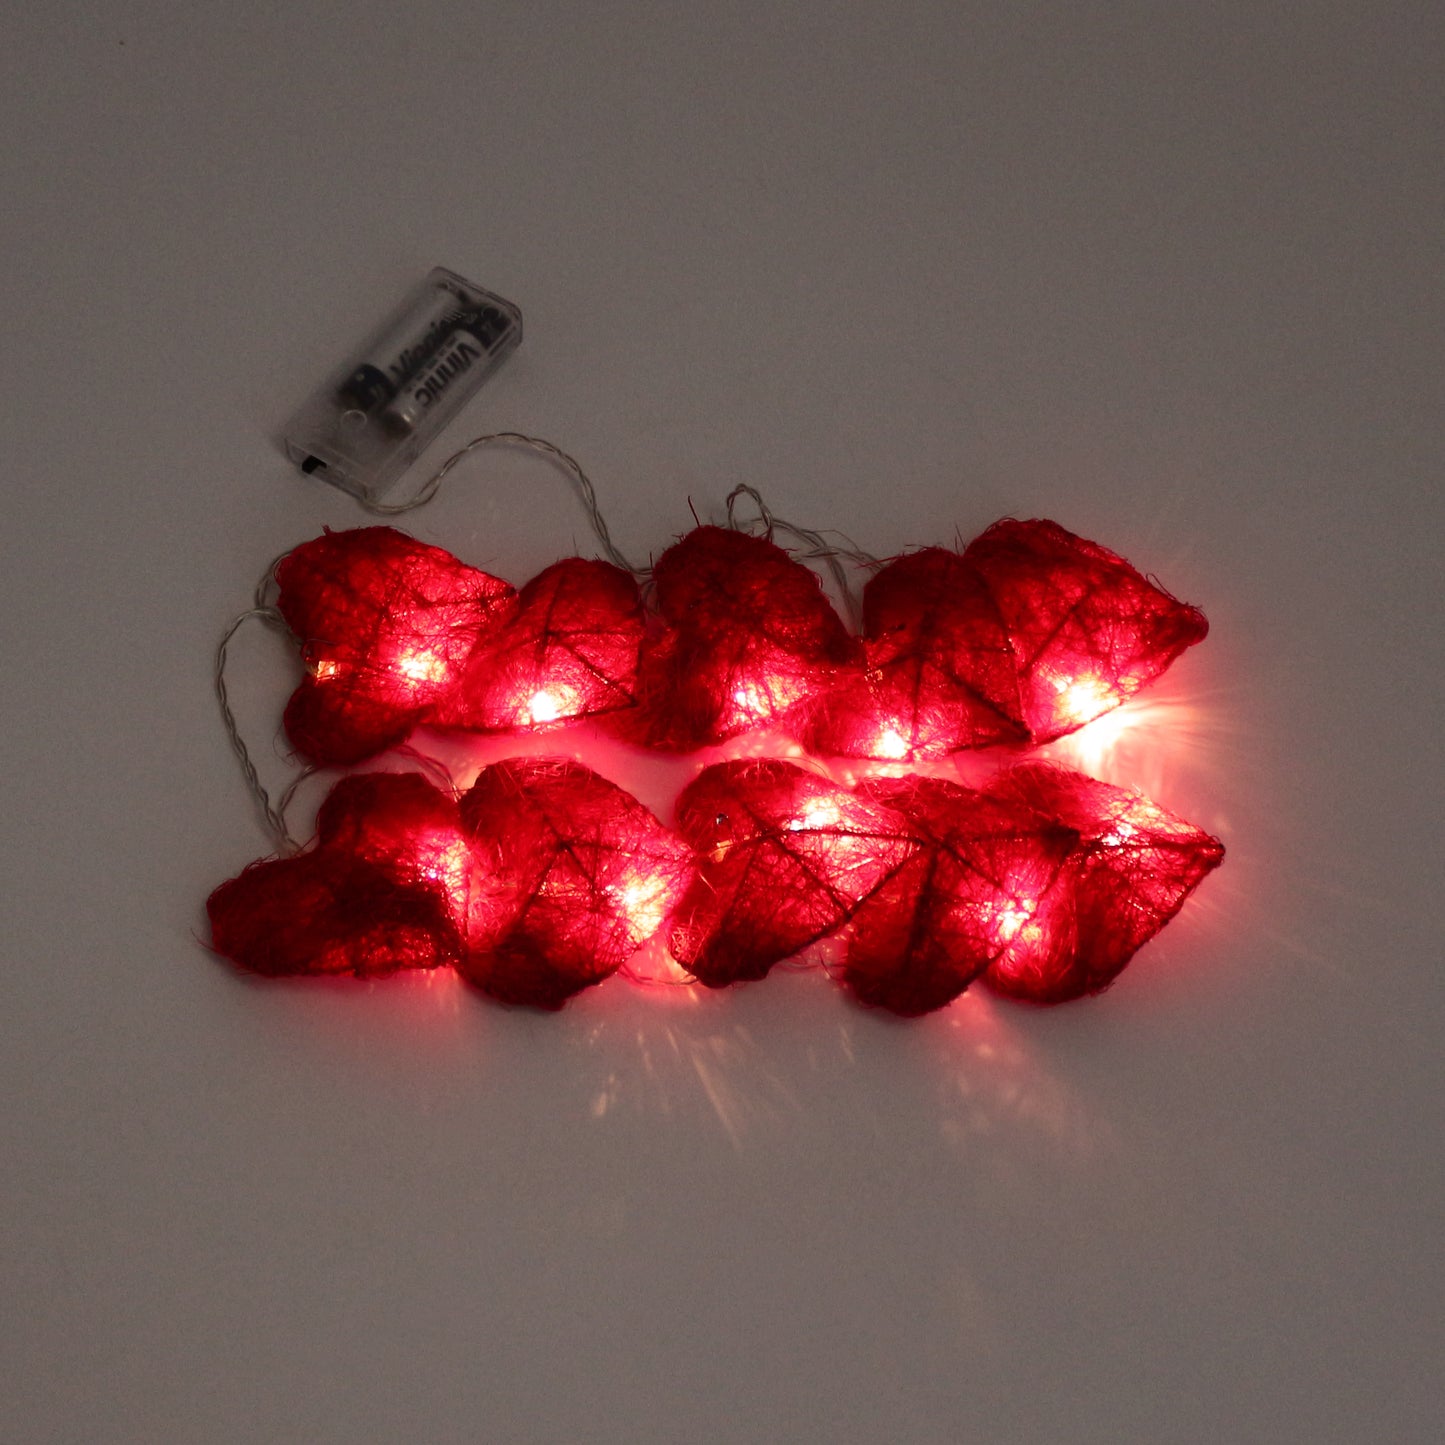 CVHOMEDECO. Red Hemp Woven Heart Shape LED String Lights Battery Operated for Home Bedroom Wedding Party Birthday Valentine's Day and Holiday Seasonal Décor, 5 ft/10 LEDs